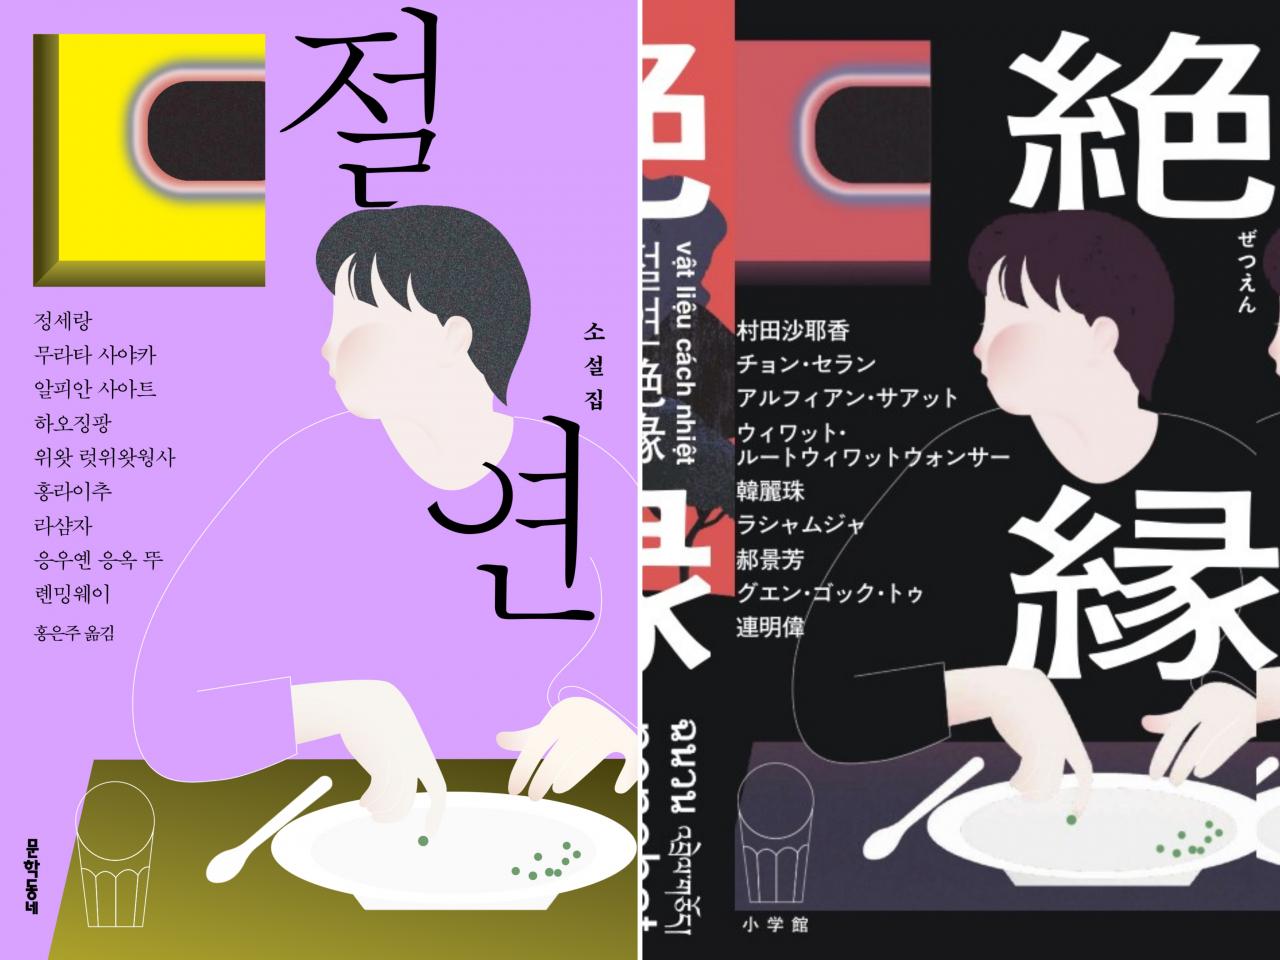 Korean edition of “Disconnection” (left) and Japanese edition of “Disconnection” (Munhak Dongne, Shogakukan)